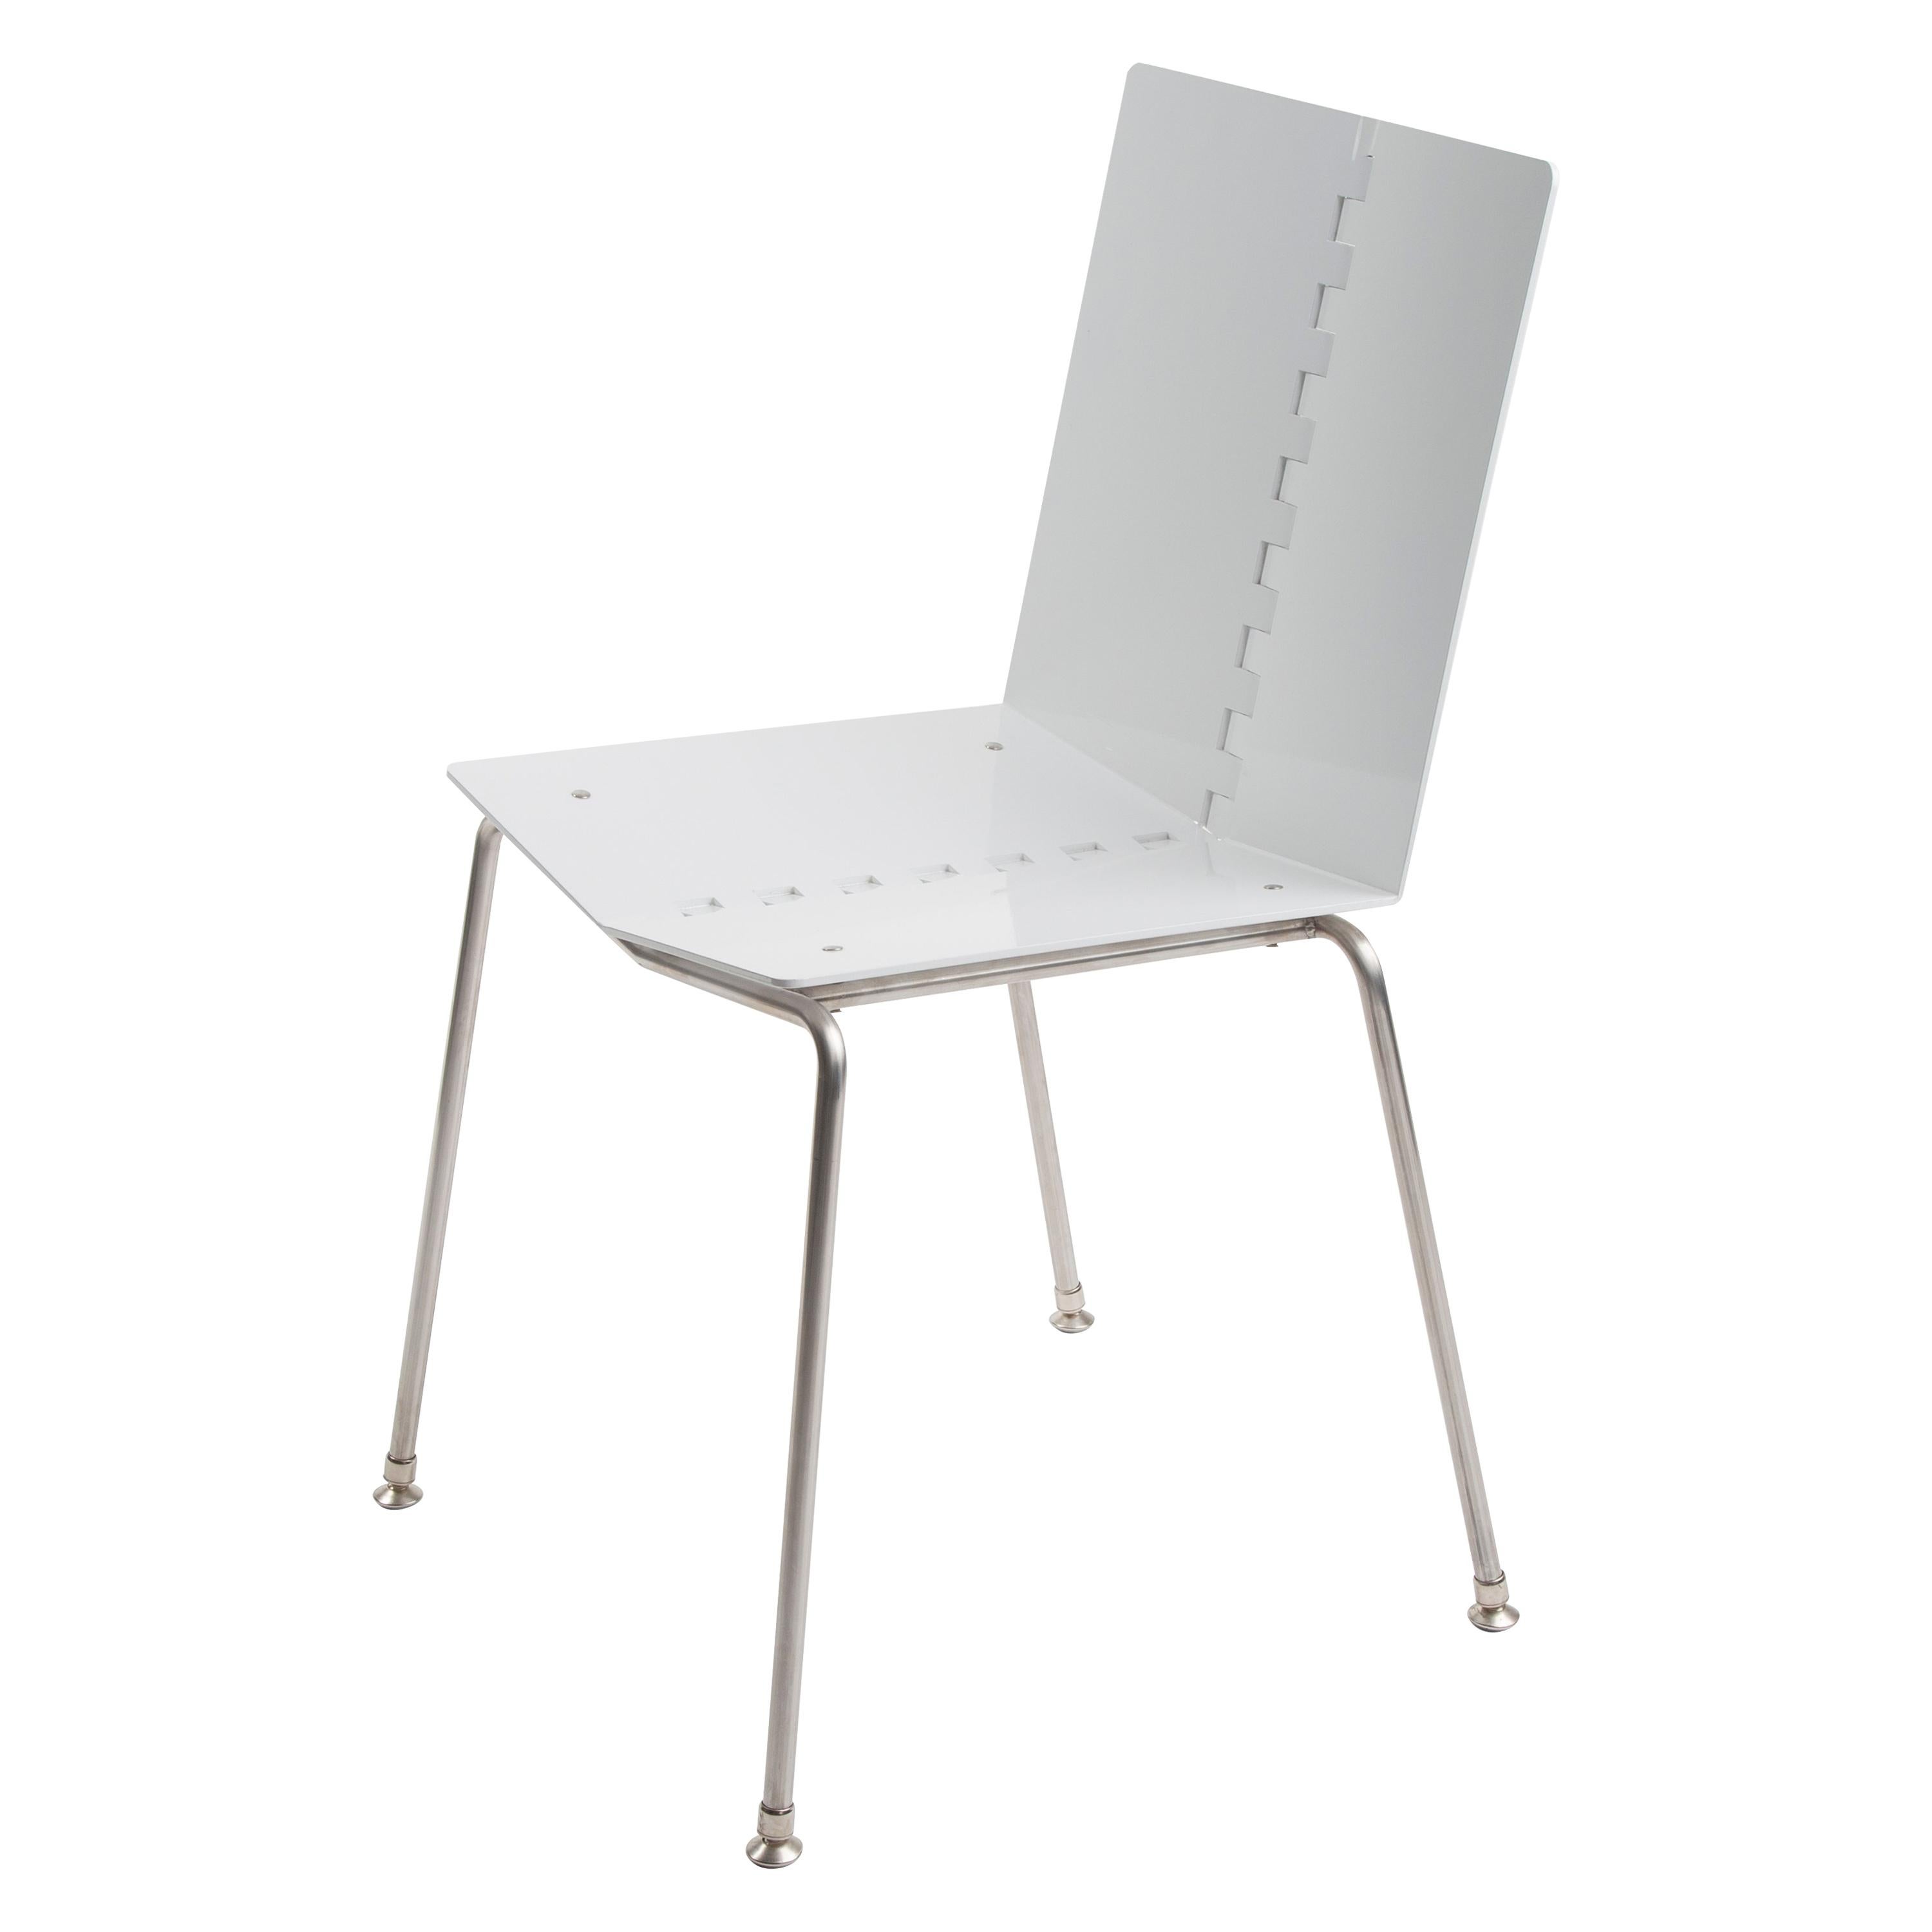 Minimal Modern Exterior Dining Chair Powder Coated with Stainless Steel Legs For Sale